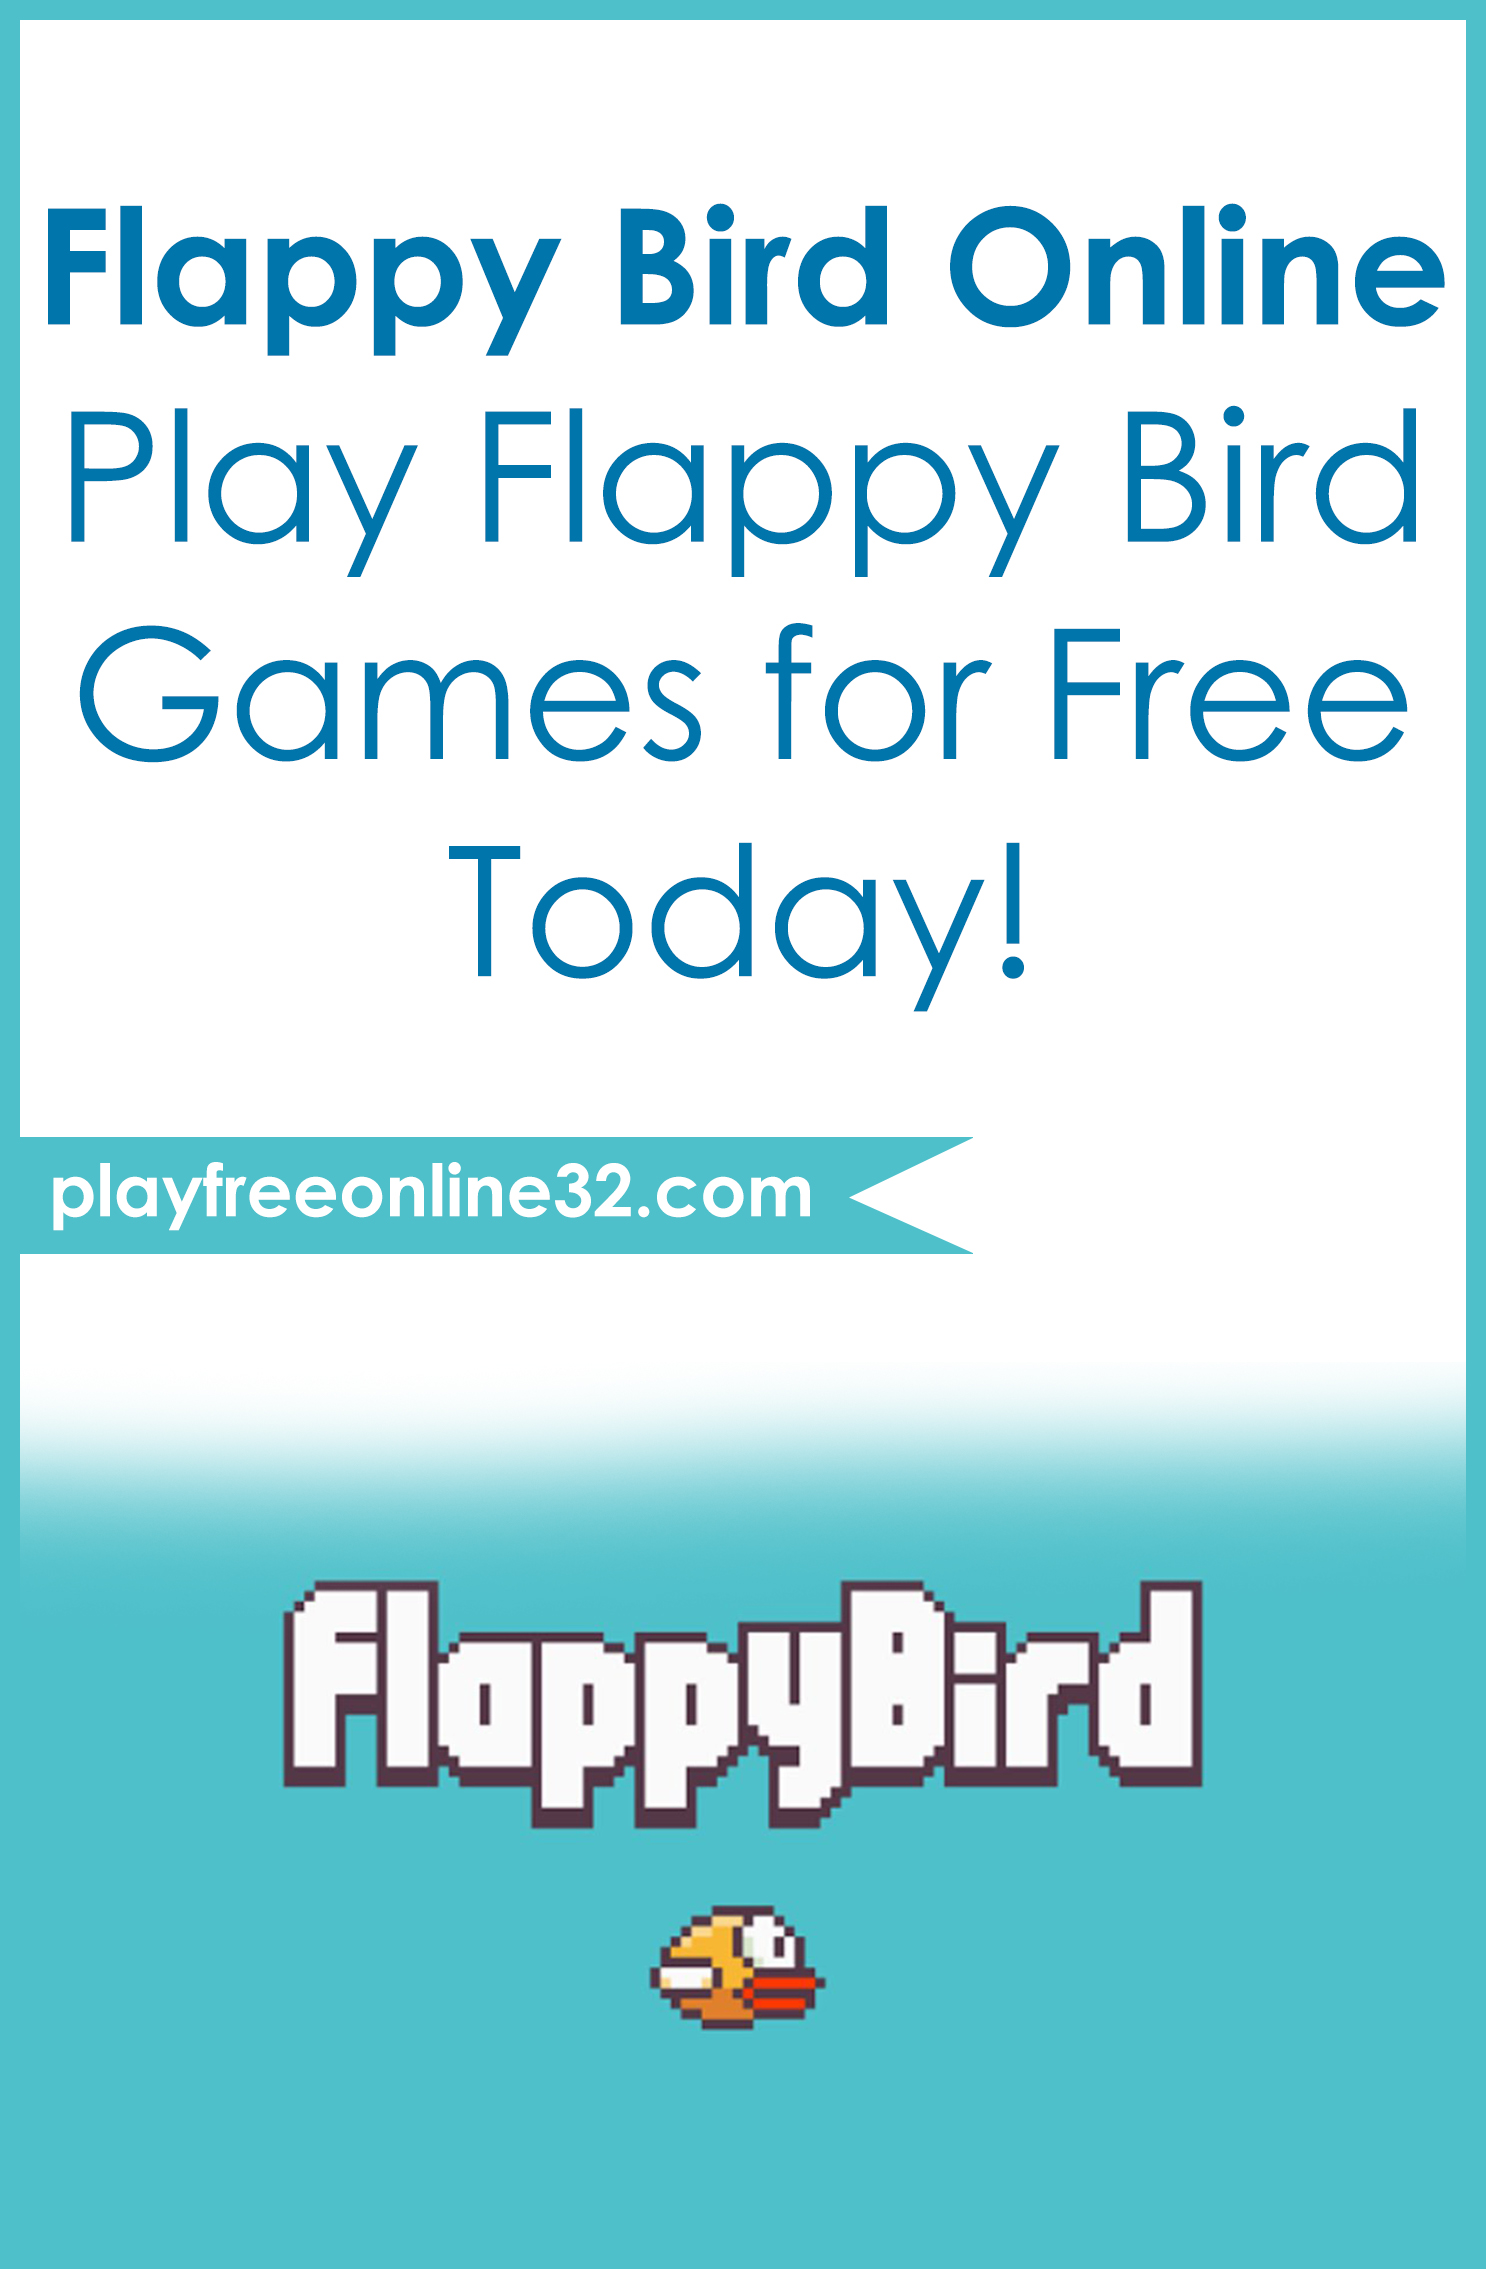 Flappy Bird Online • Play Flappy Bird Games for Free Today!